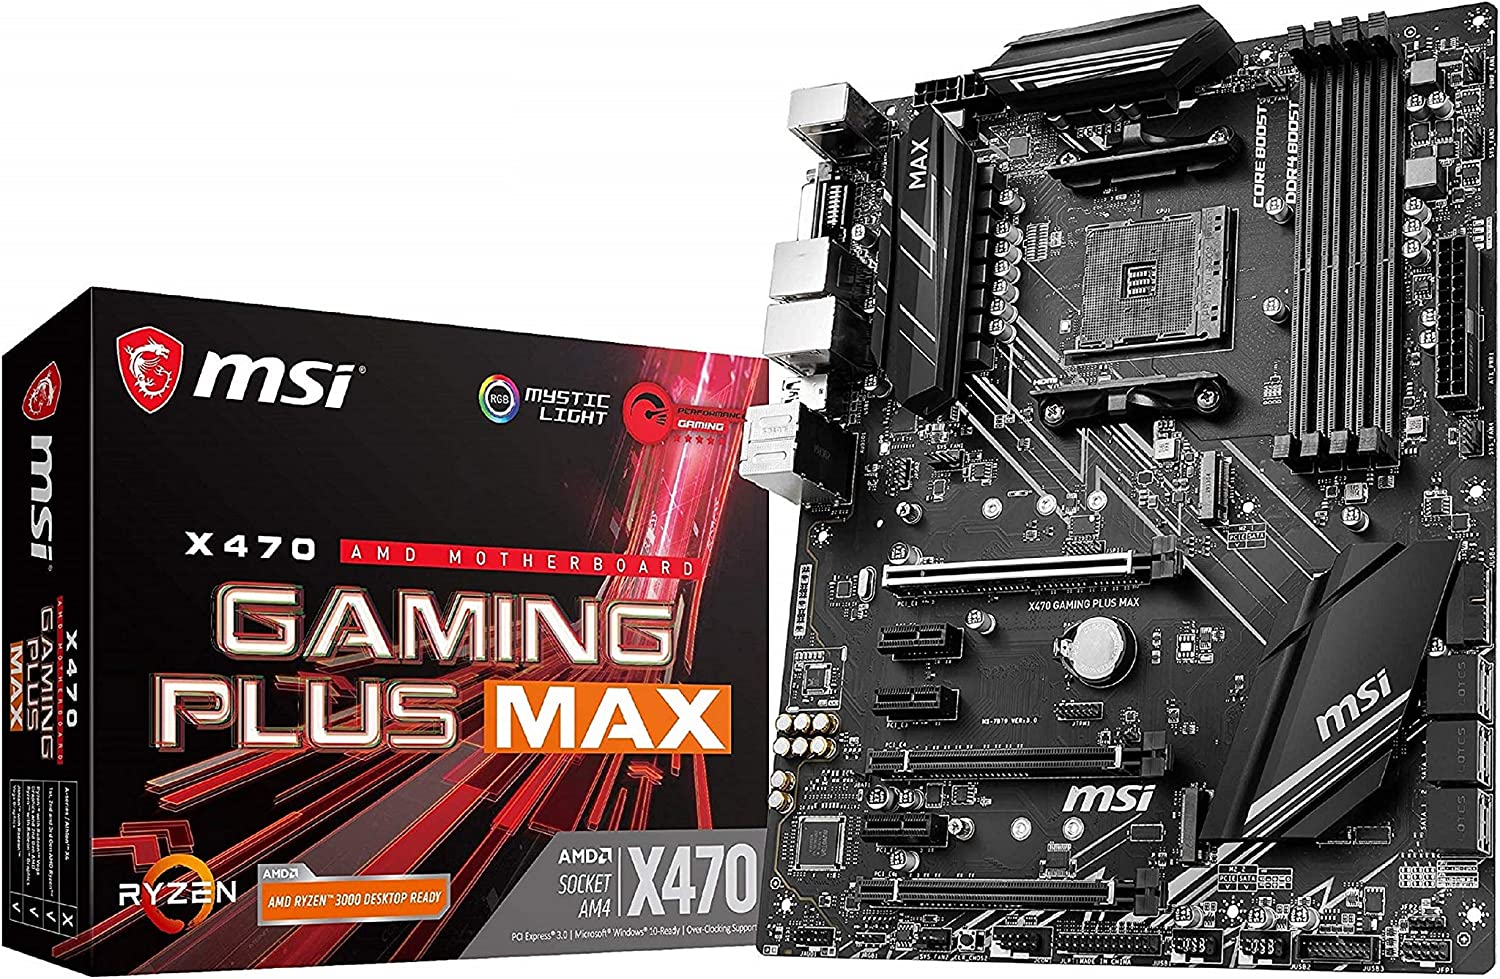 MSI X470 GAMING PLUS MAX Motherboard ATX - Supports AMD Ryzen 1st, 2nd and 3rd Gen Processors, AM4, DDR4 Boost (3866MHz:OC), 2 x PCIe 3.0 x16, 1 x PCIe 2.0